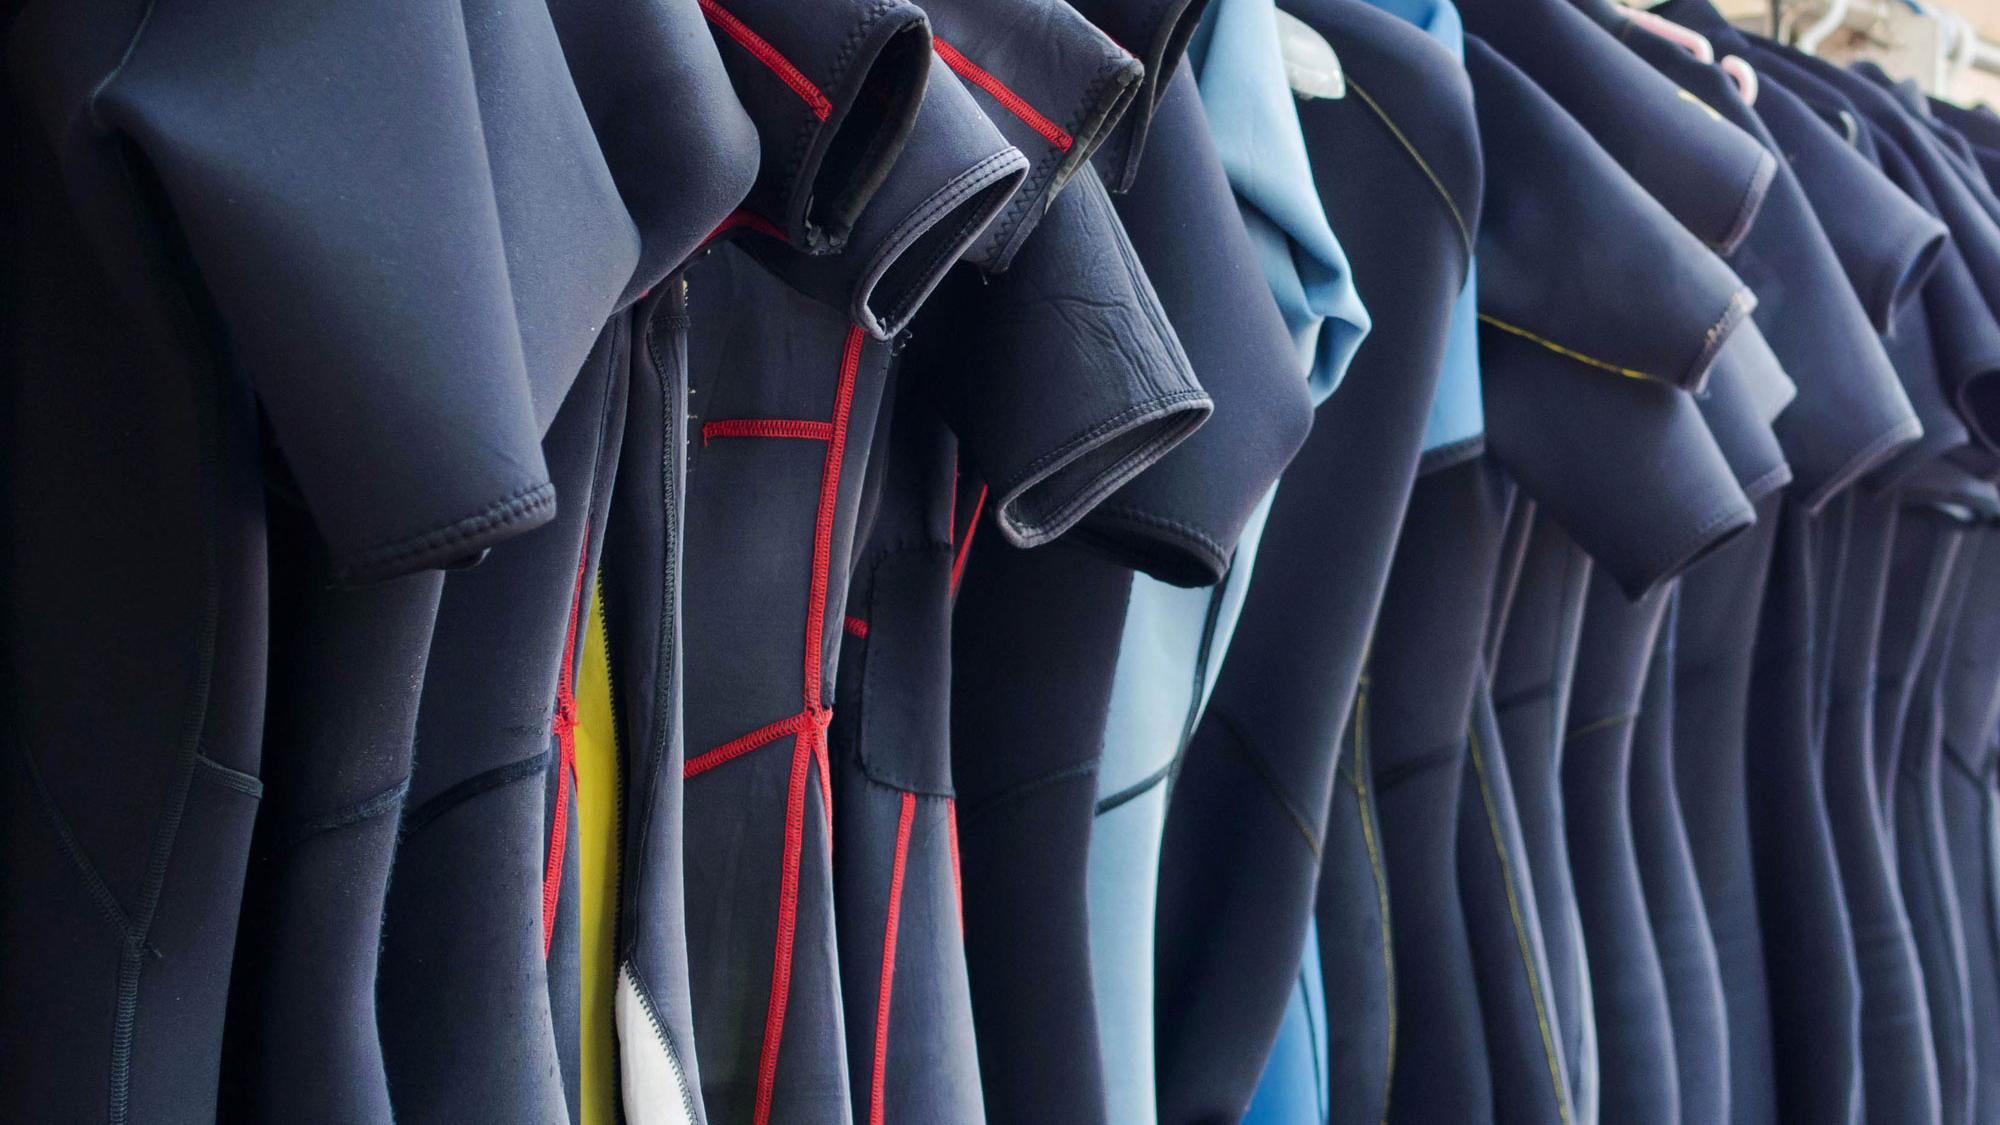 How to Care For Wetsuit